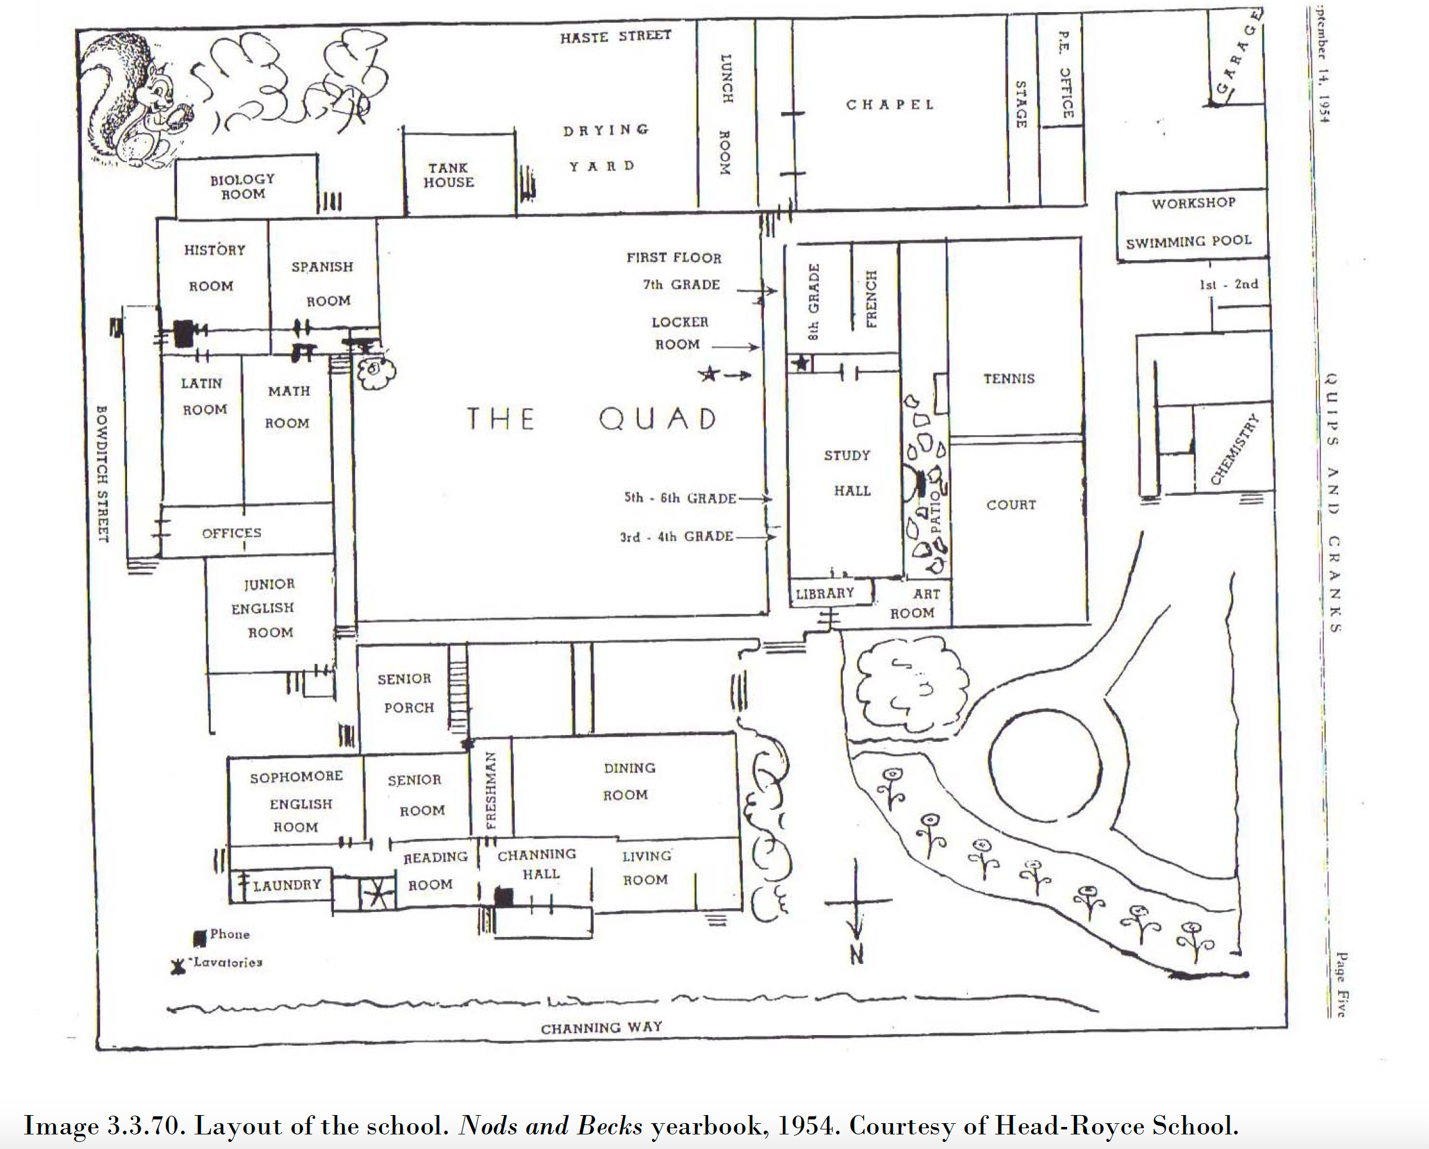 Layout of the school